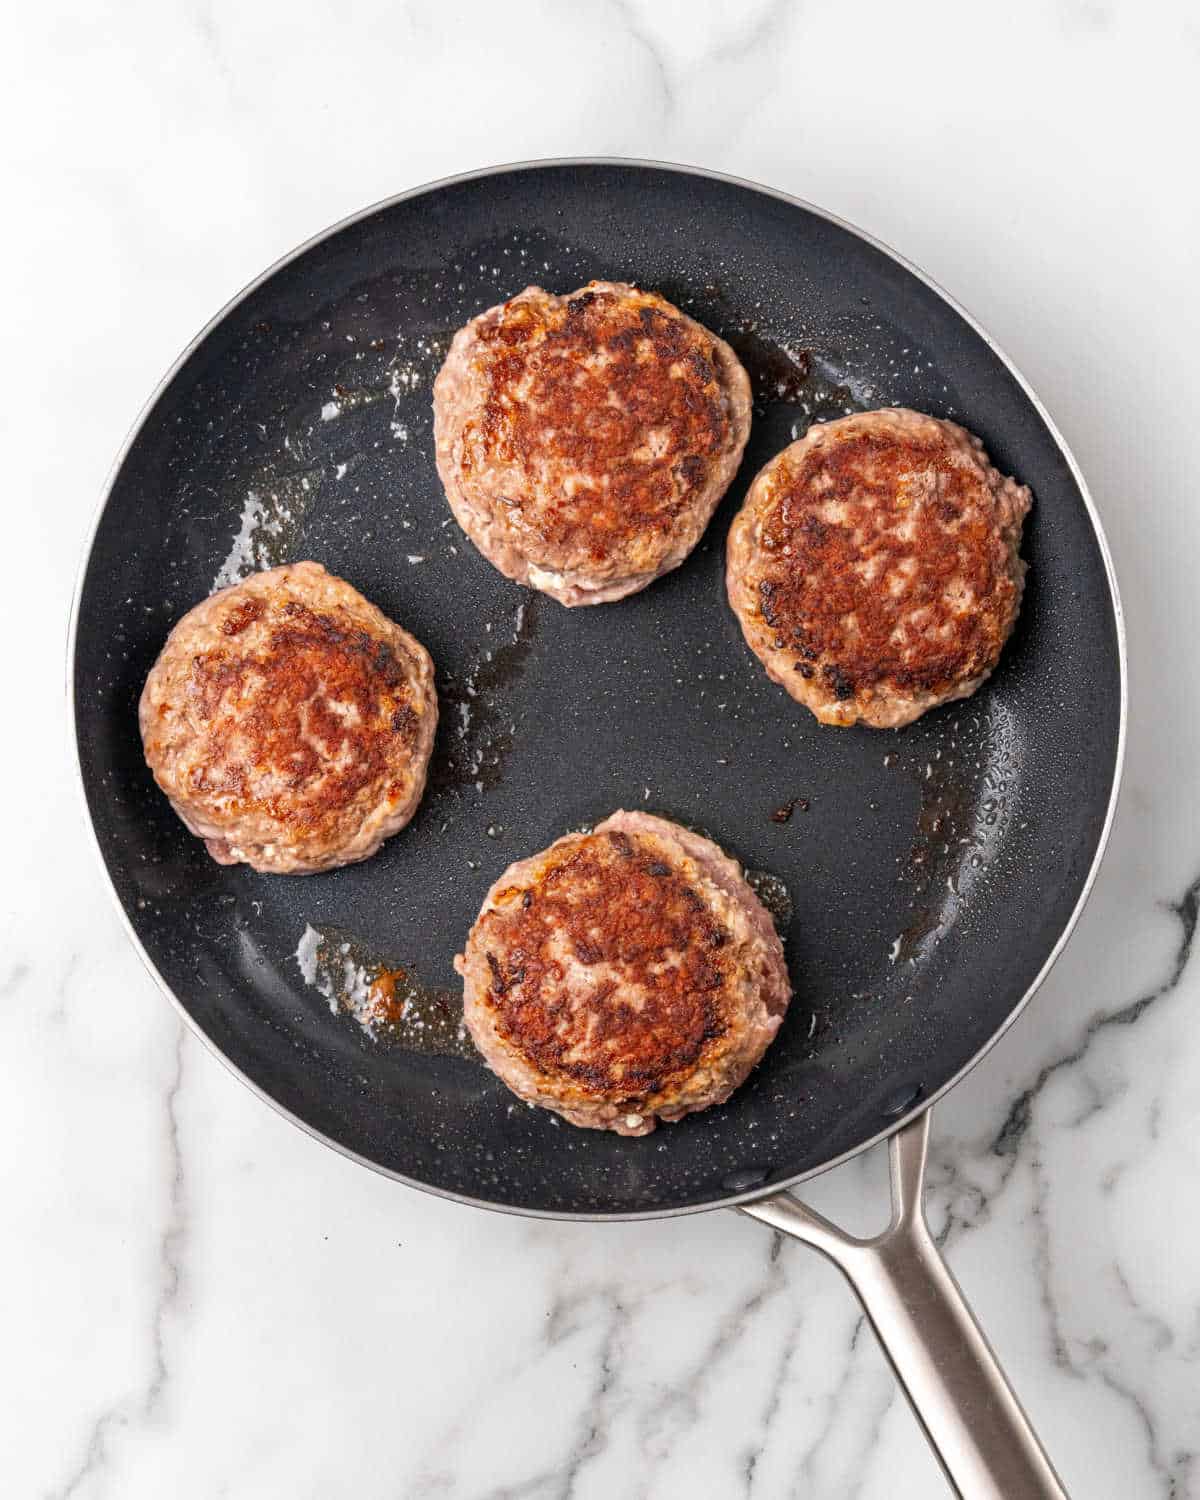 Four hamburgers being cooked in a dark skillet. White and grey marble surface.